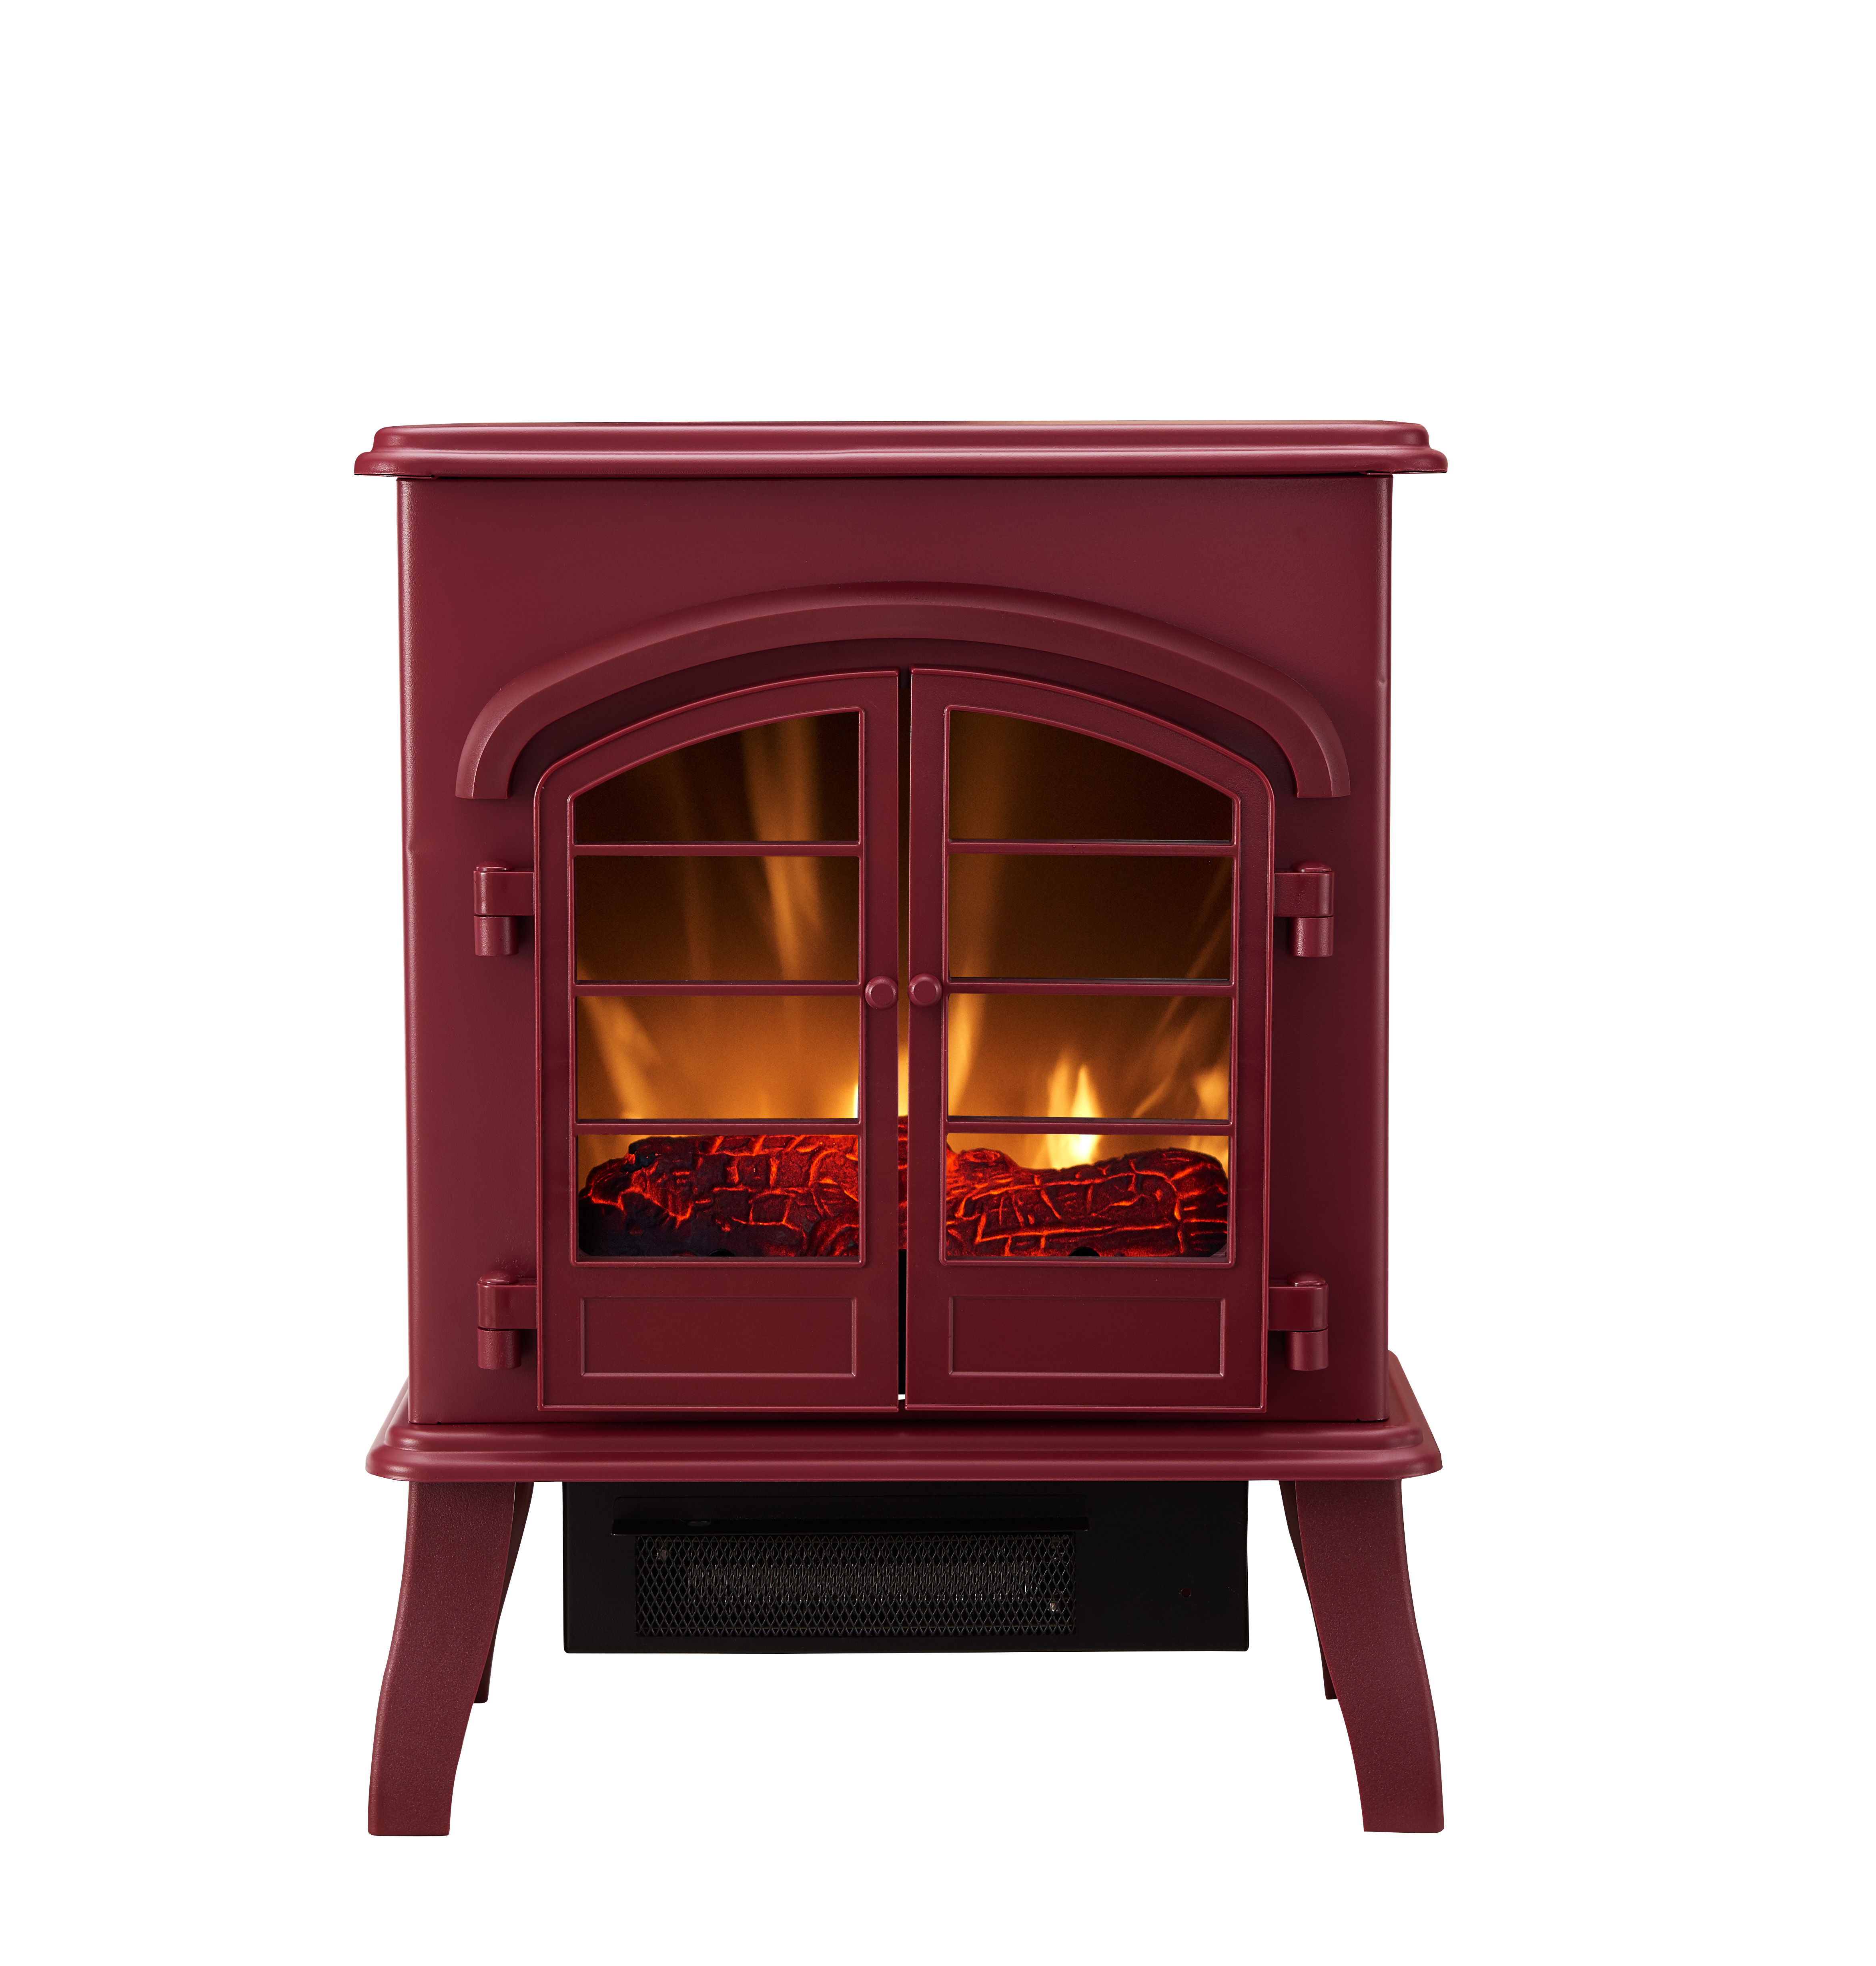 Bold Flame Electric Space Heater, Glossy Red - image 1 of 7